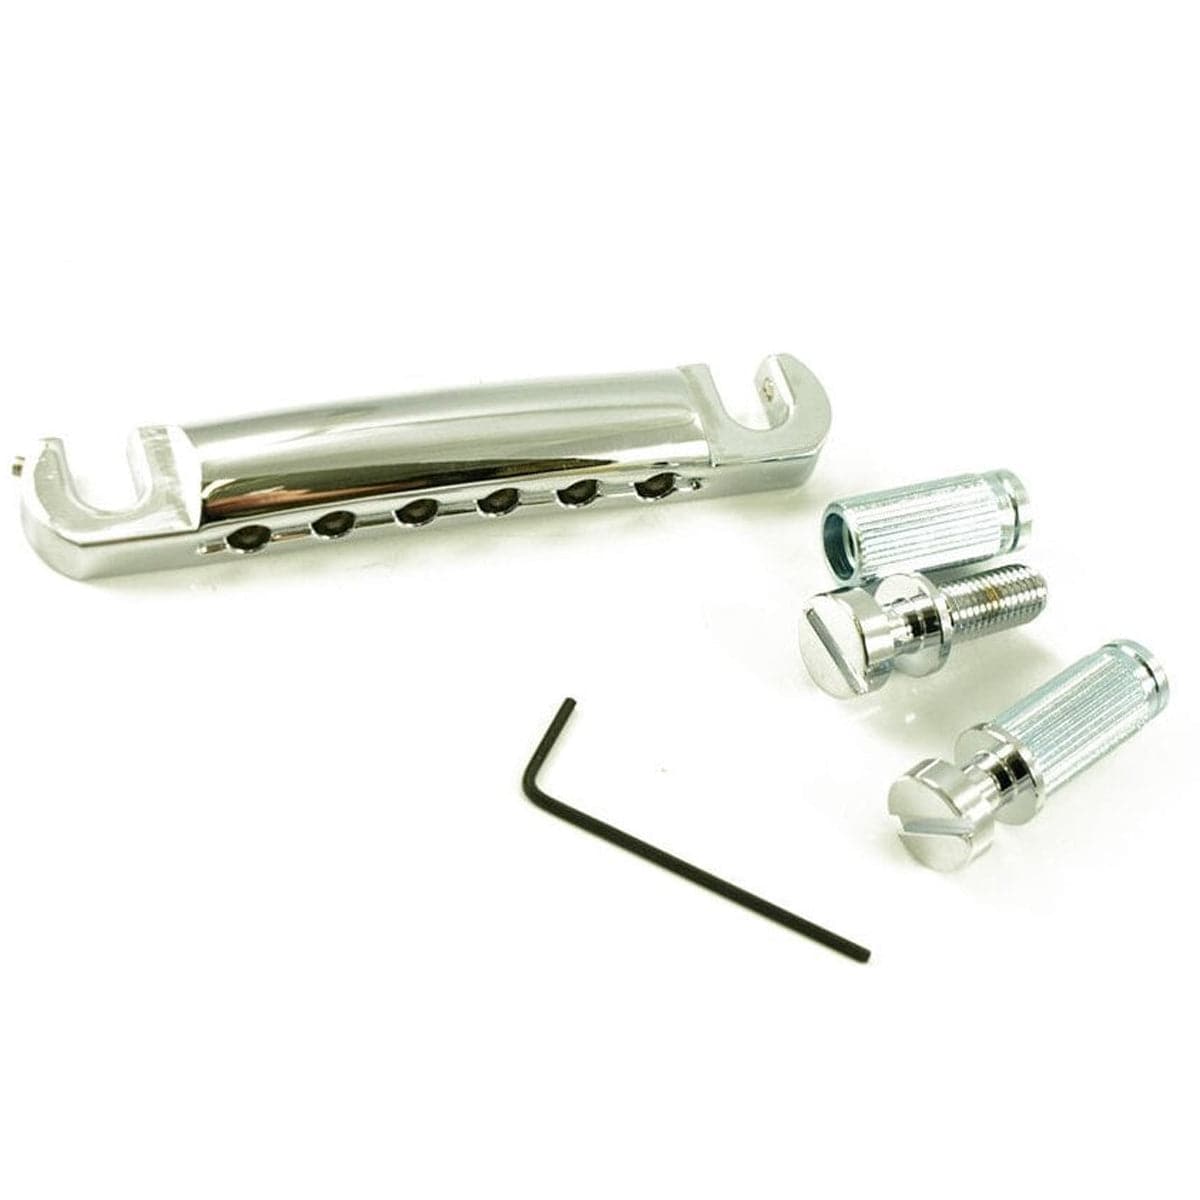 TonePros T1ZS Stopbar Tailpiece for Gibson Les Paul & SG - Nickel